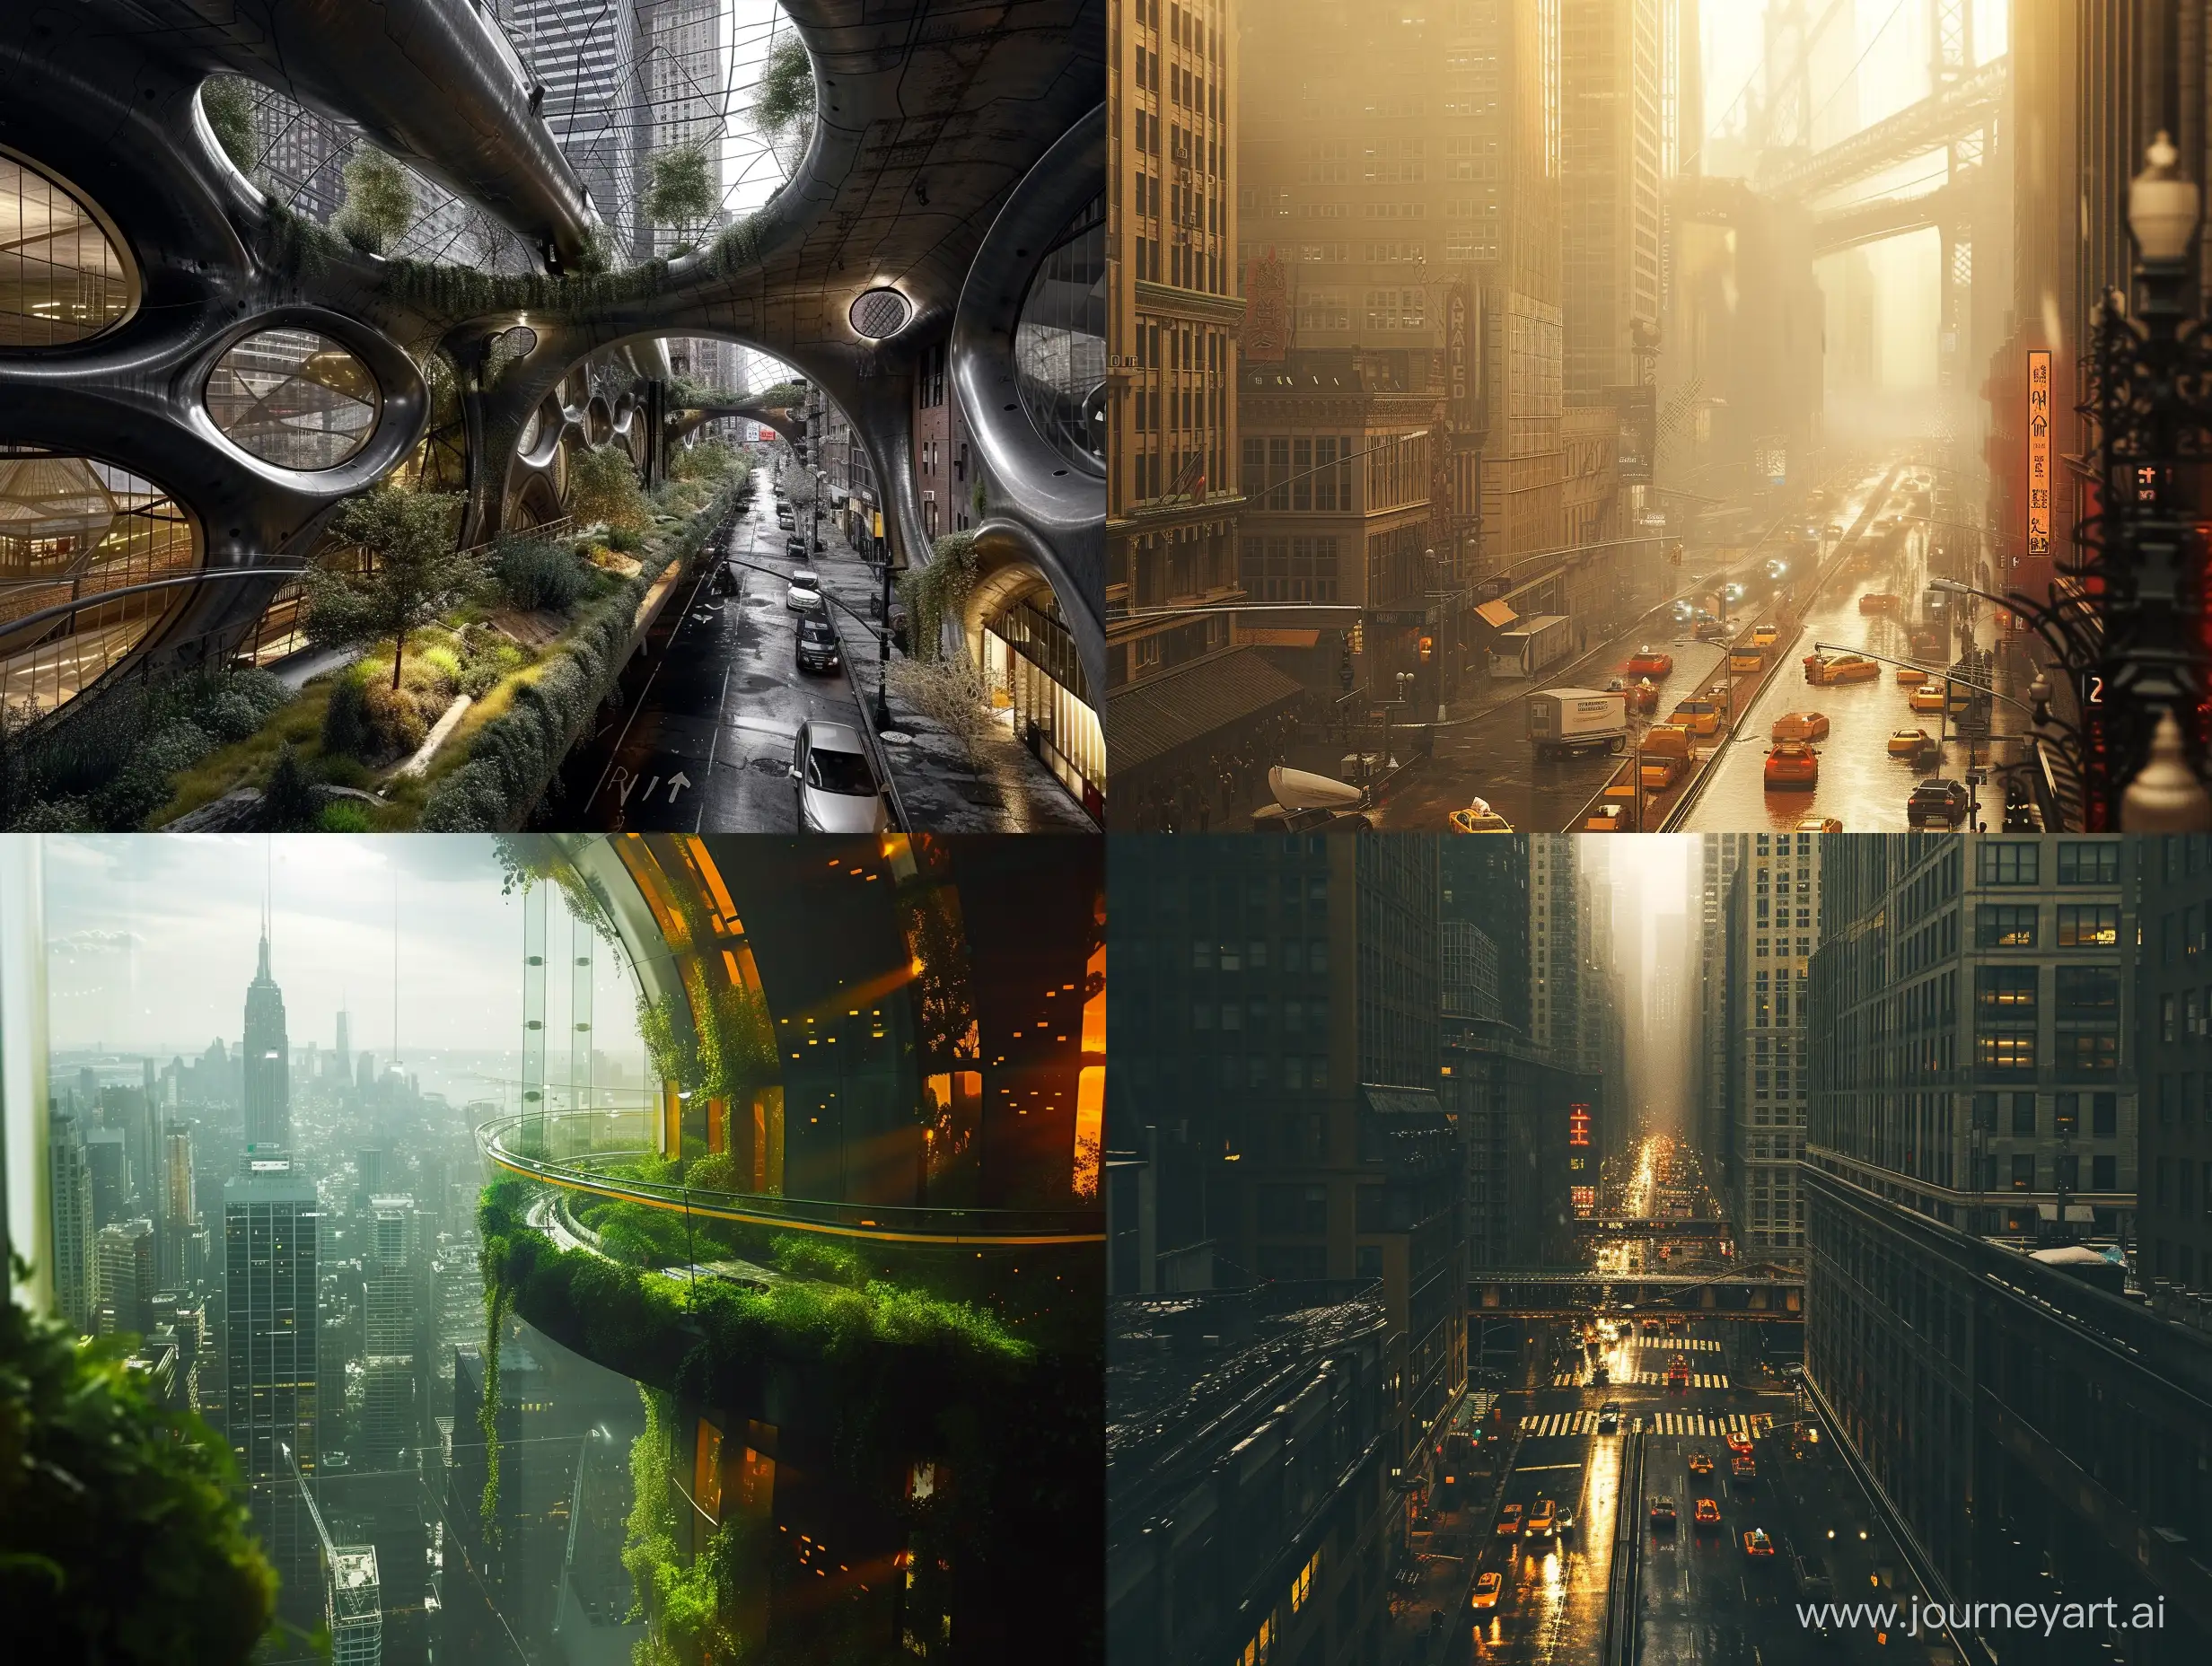 a photo showcasing new york city, photography, environment, full view, natural lighting, science fiction, futuristic, 